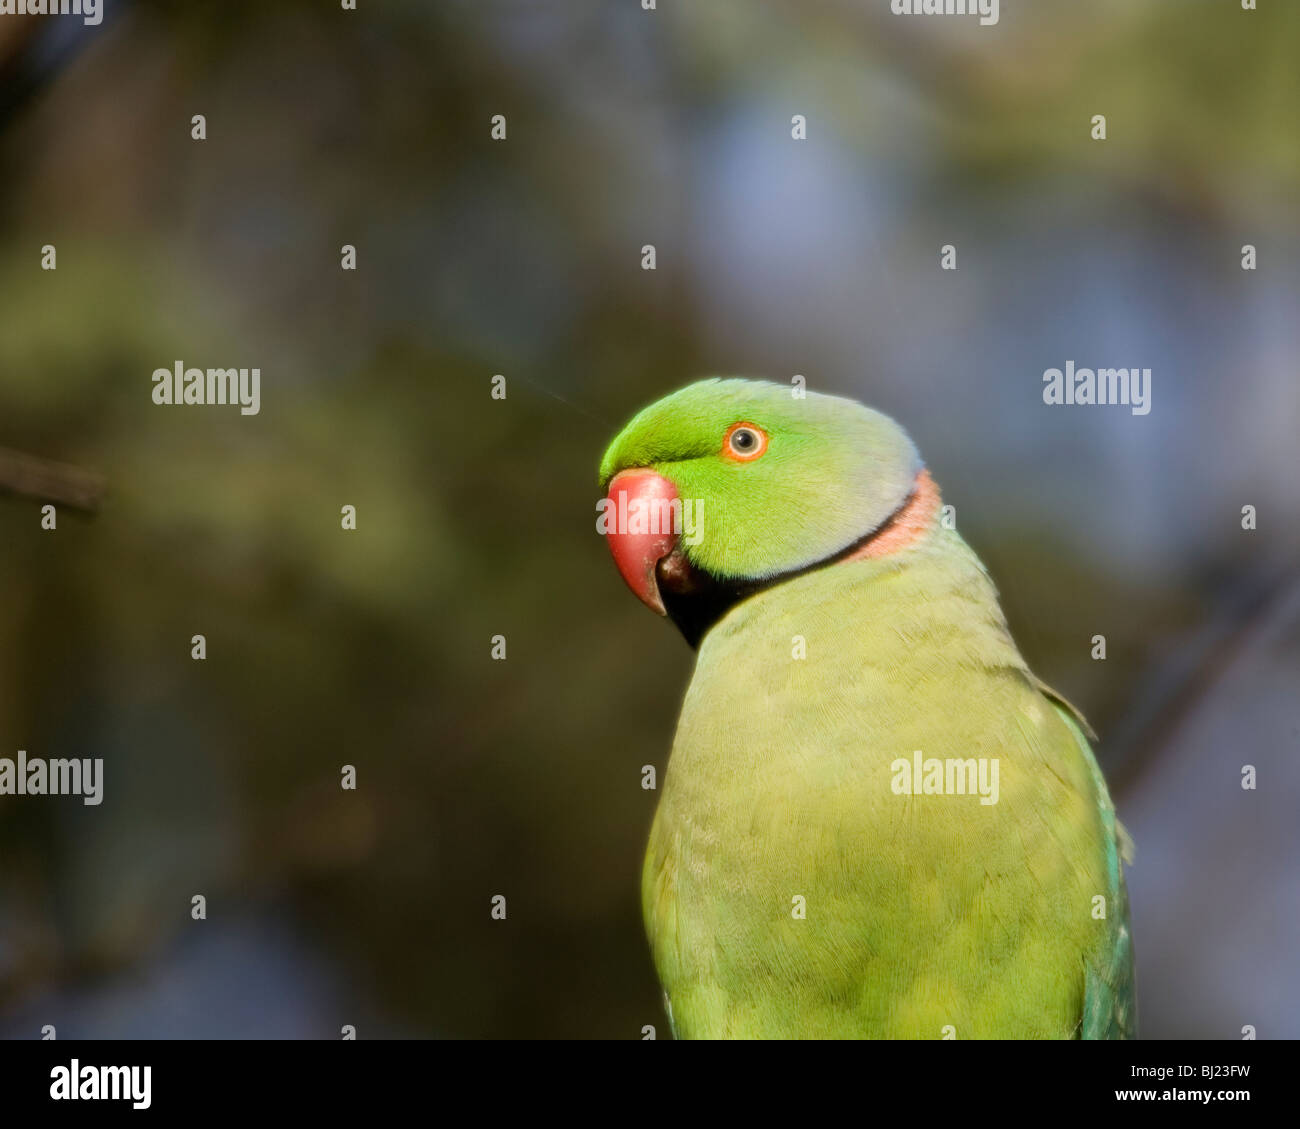 A green parrot Stock Photo